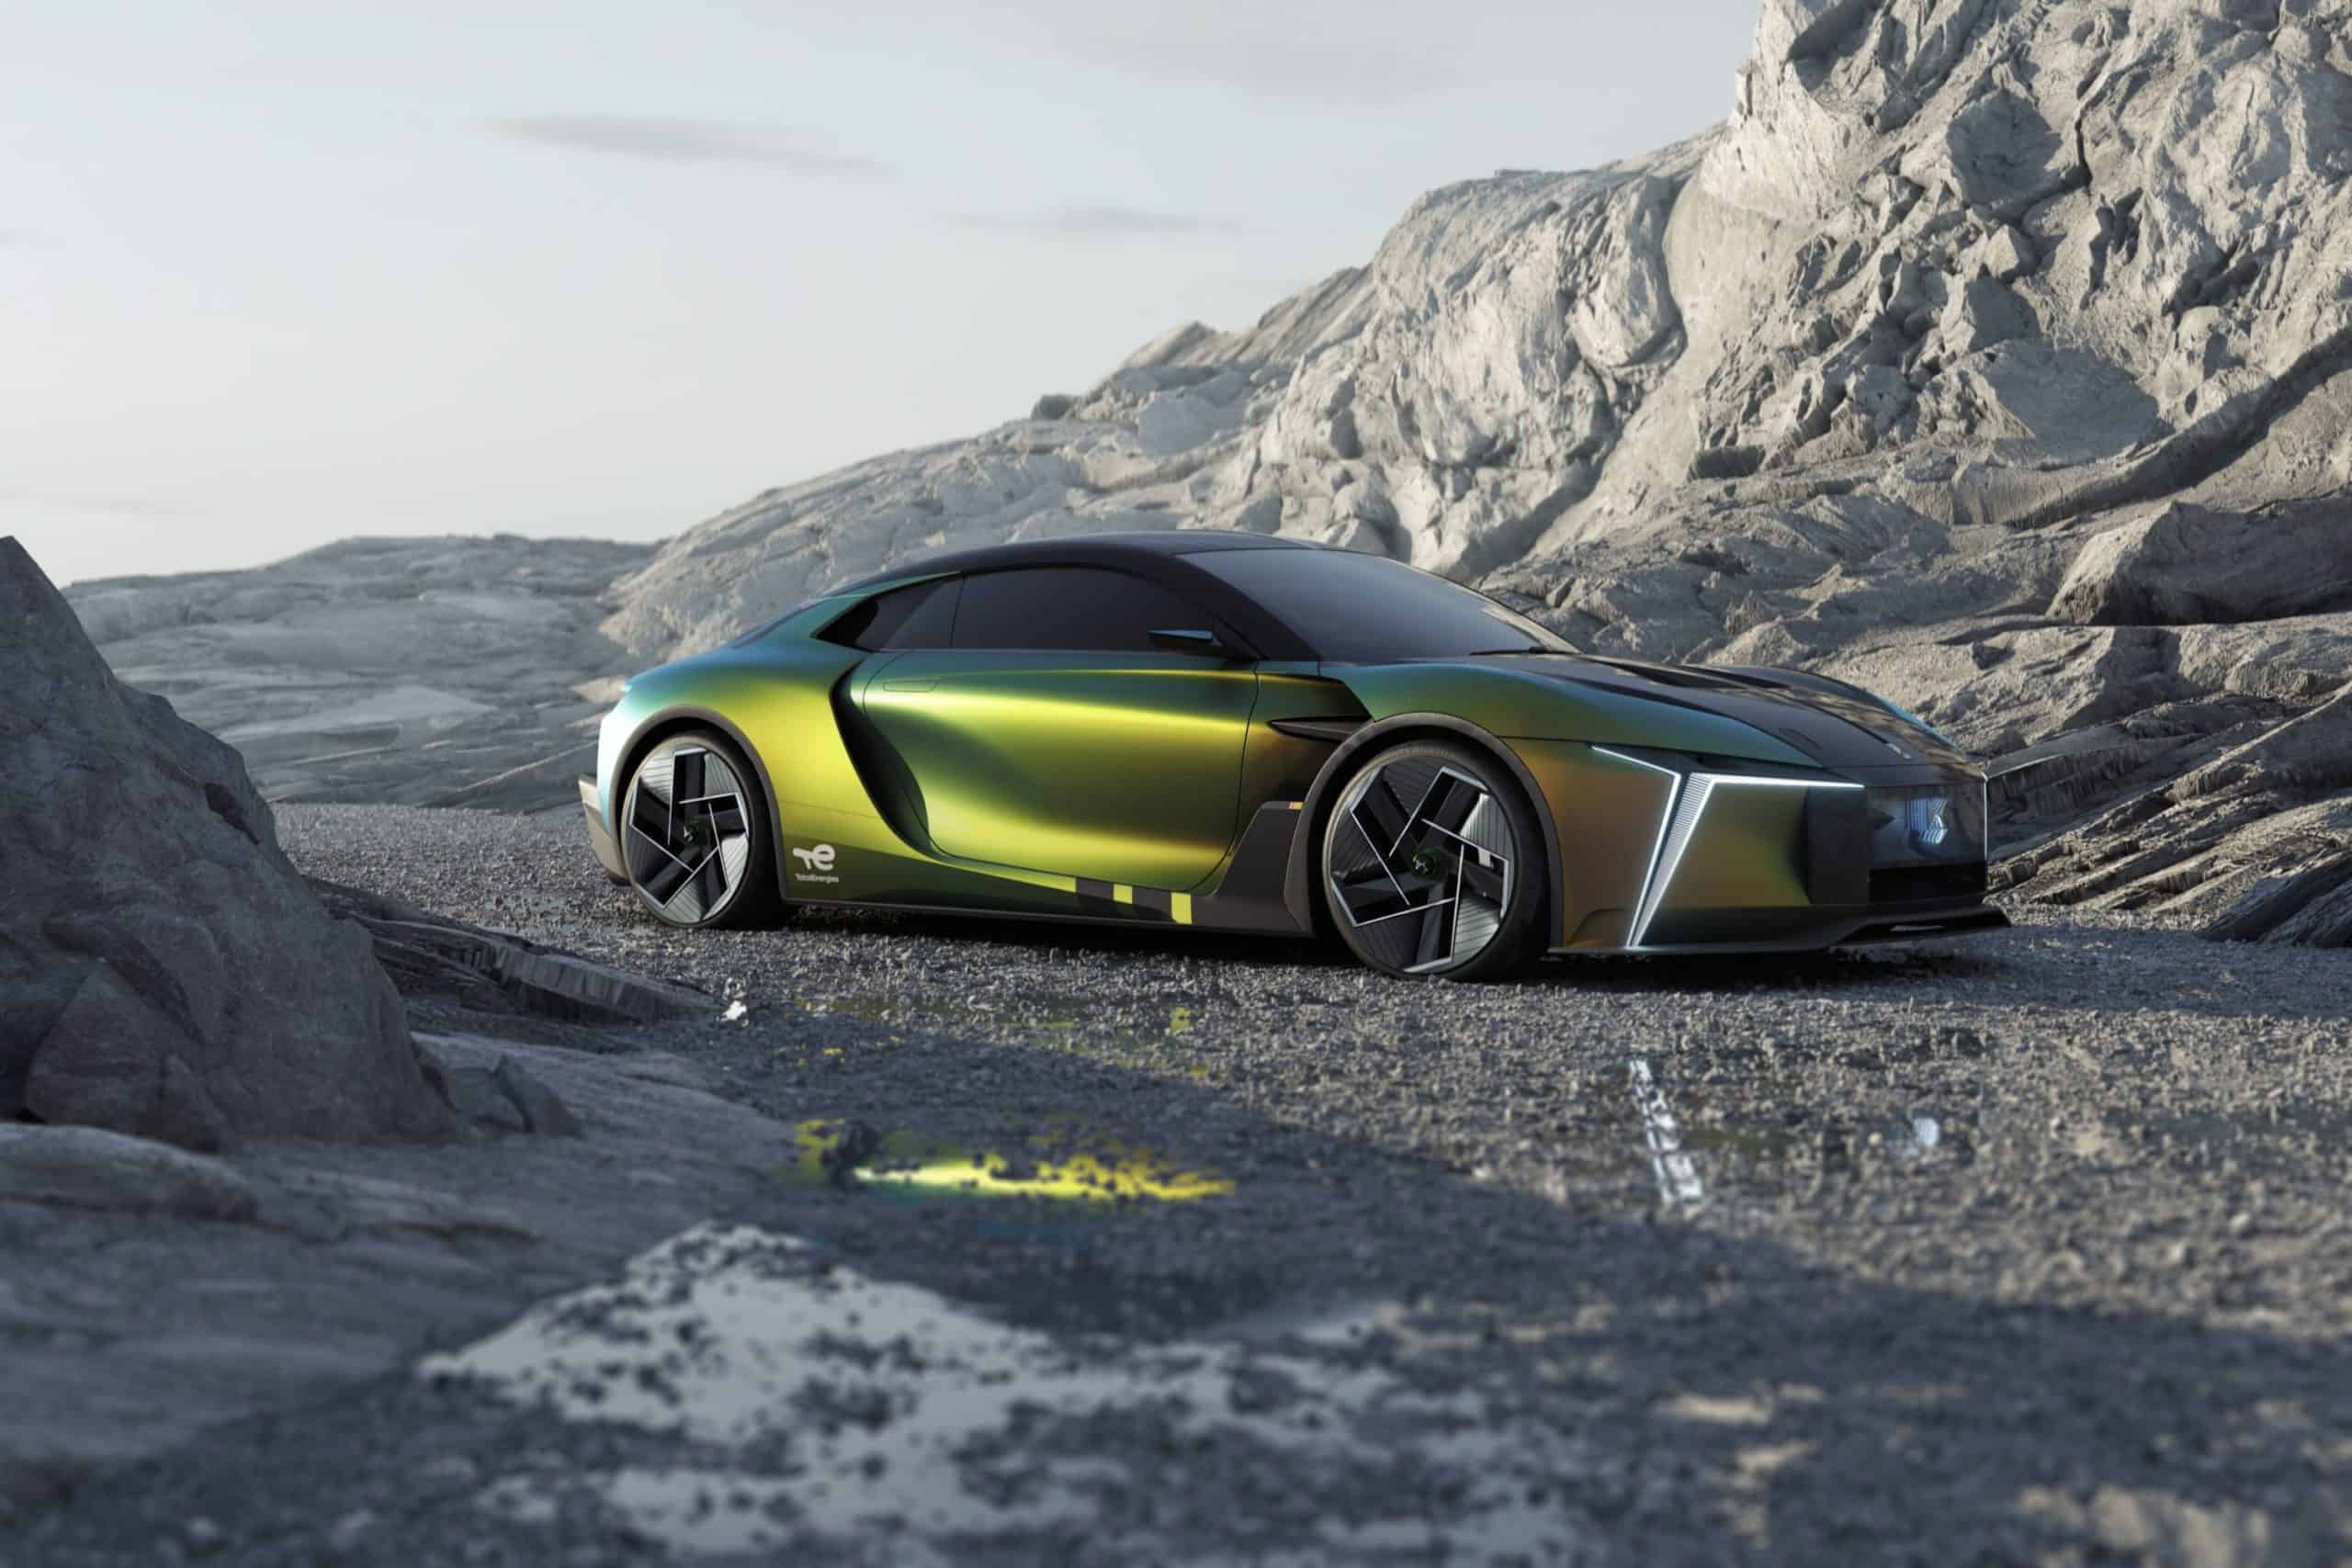 DS E-Tense Performance concept|2022 Nissan GT-R|Koenigsegg new plant|Lexus Electrified SUV concept|2023 Ford Mustang test mule